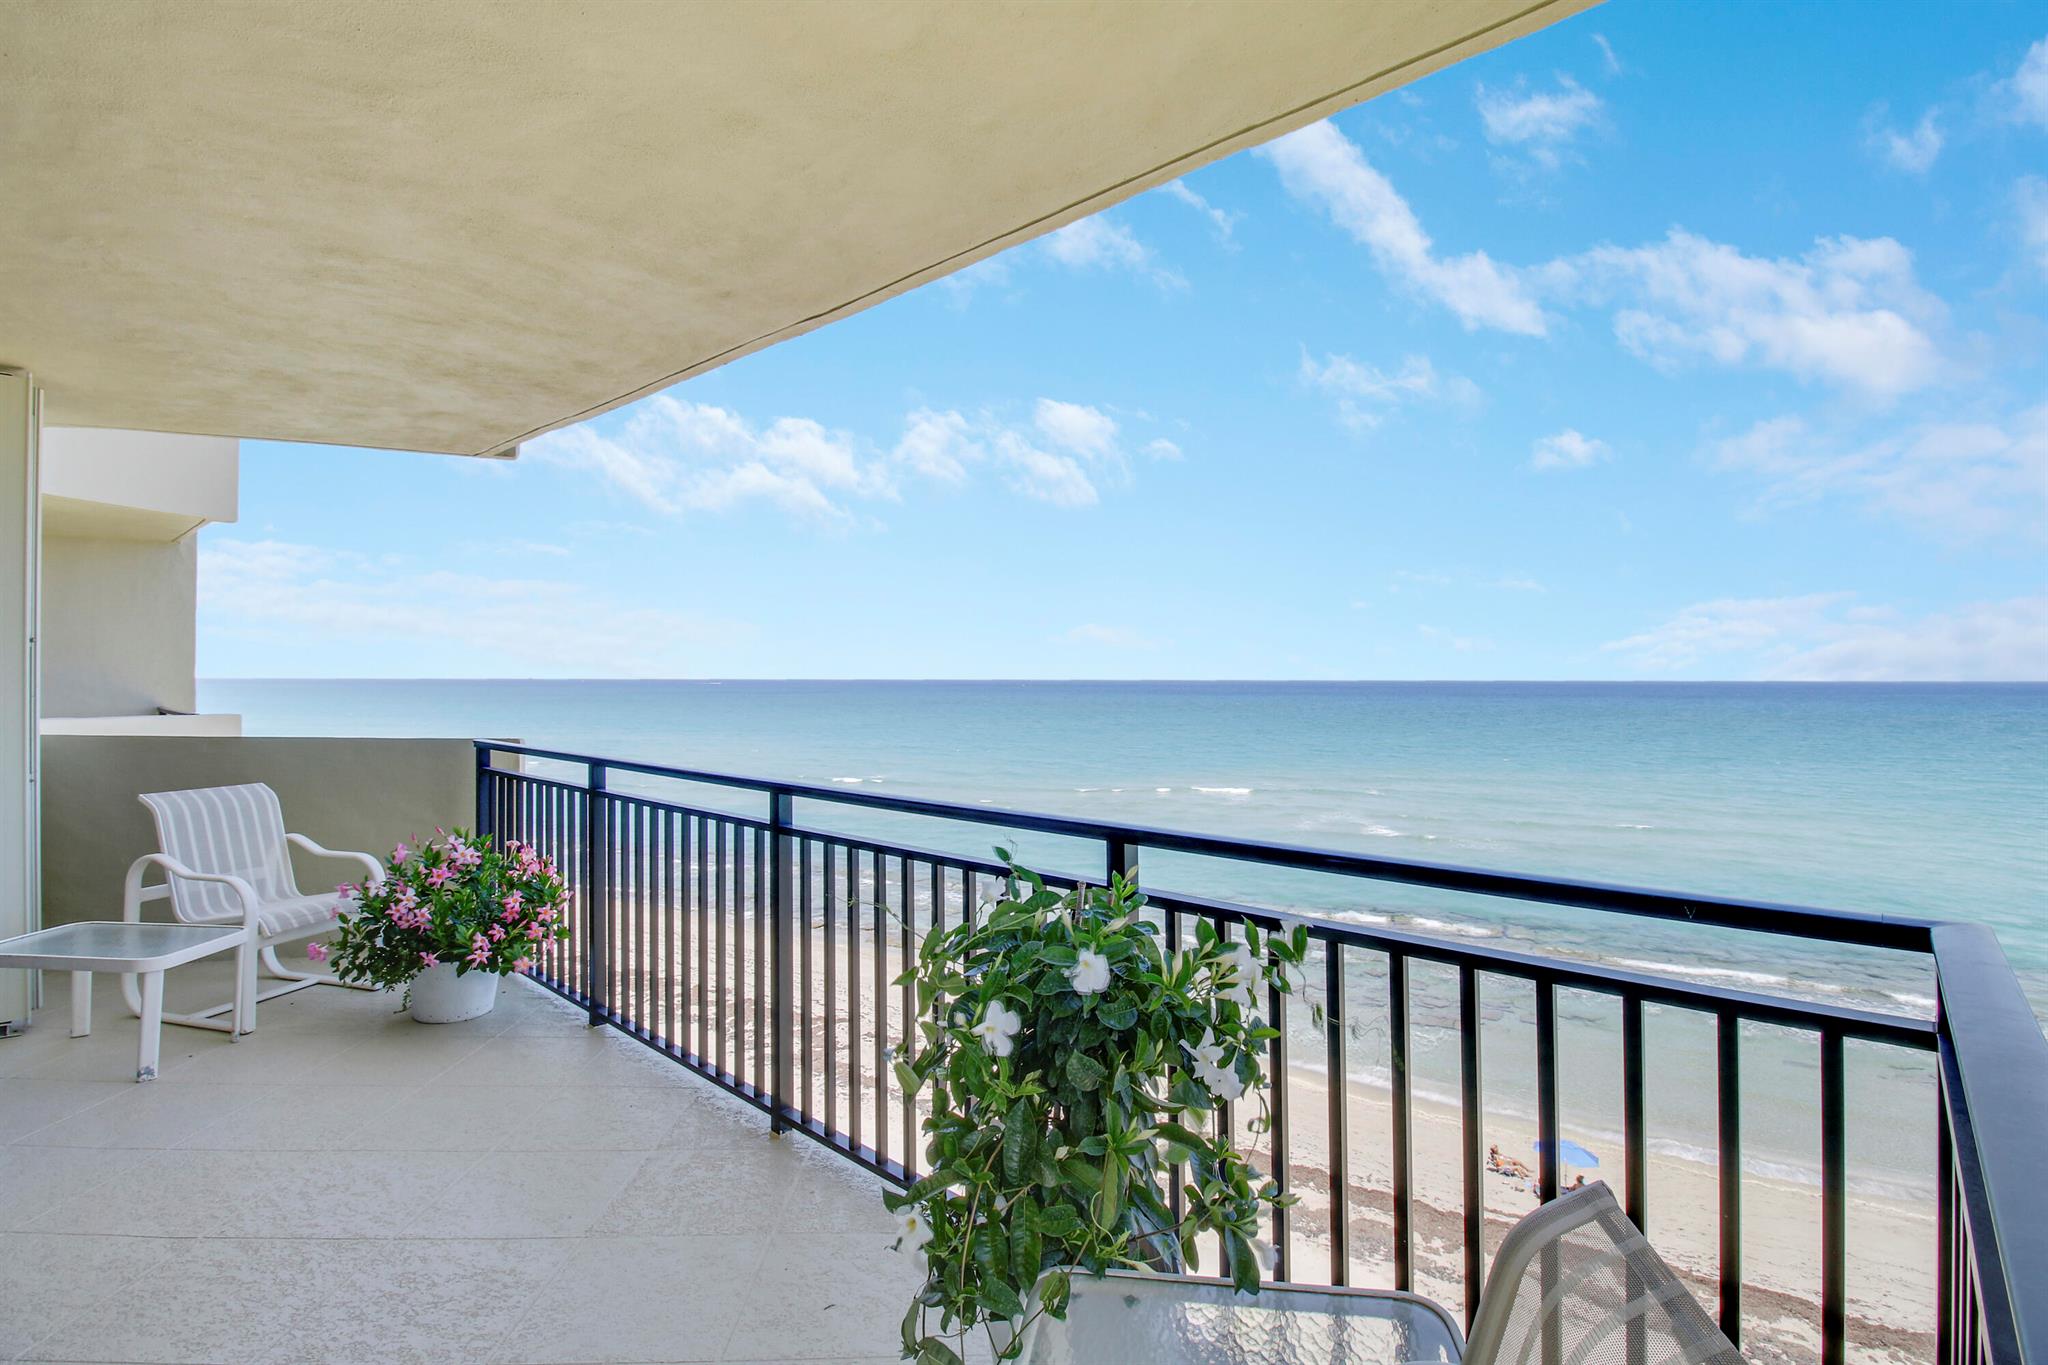 Direct ocean front condo. Wake-up and soak-in the glorious sunrise stretching out over the Atlantic Ocean from one of your four balconies. On Singer Island's 4.7 miles of white sand beaches. Located in the easily accessible north end of the peninsula. Seagrape amenities include cable; electric vehicle charging; a resort style heated pool and spa; clubhouse with a kitchen; outdoor grilling area; tennis; shuffleboard and an onsite property manager. Private beach access! Additional Storage space. Assigned and guest parking. Covered parking. The exterior entrance, lobby, hallways, elevators and condo front doors of this sixteen story building have been elegantly remodeled. A great opportunity to create a private retreat on the ocean with views that are priceless.